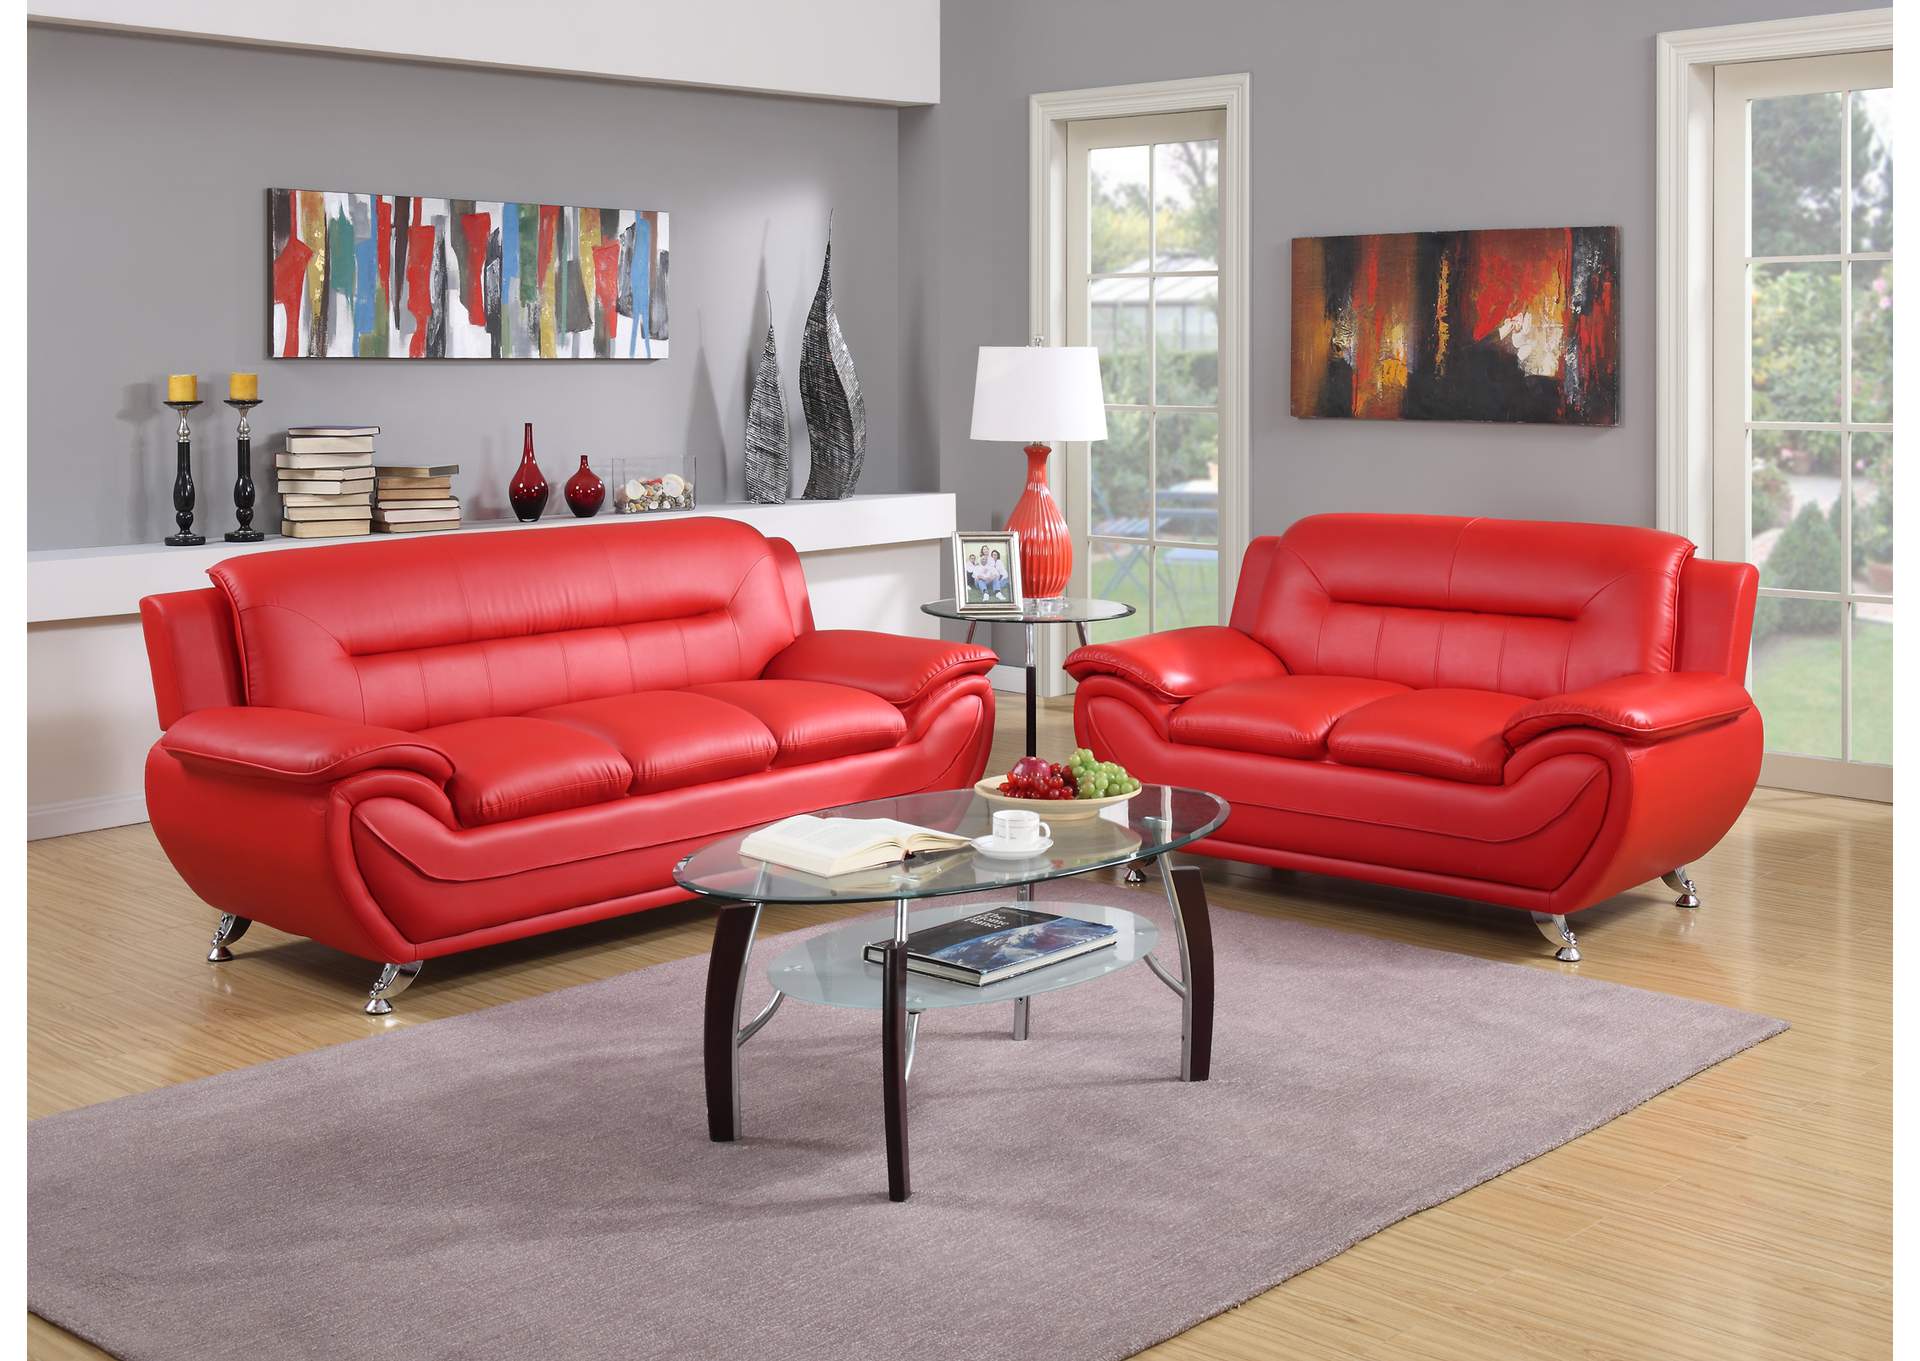 U2703 Red Faux Leather Loveseat,Global Trading